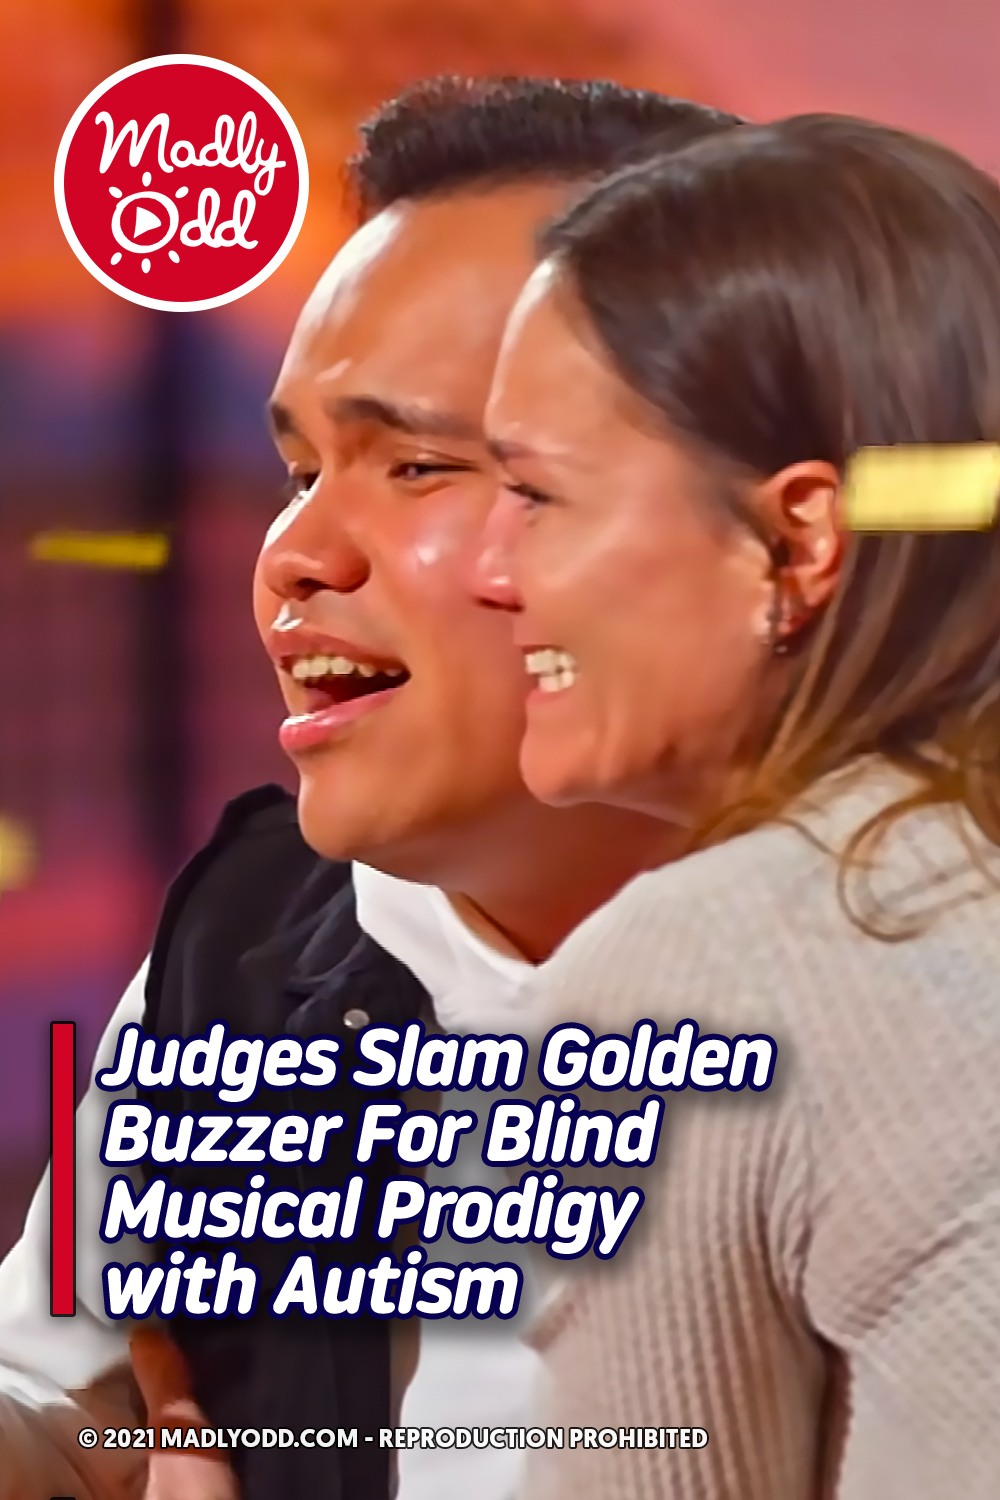 Judges Slam Golden Buzzer For Blind Musical Prodigy with Autism